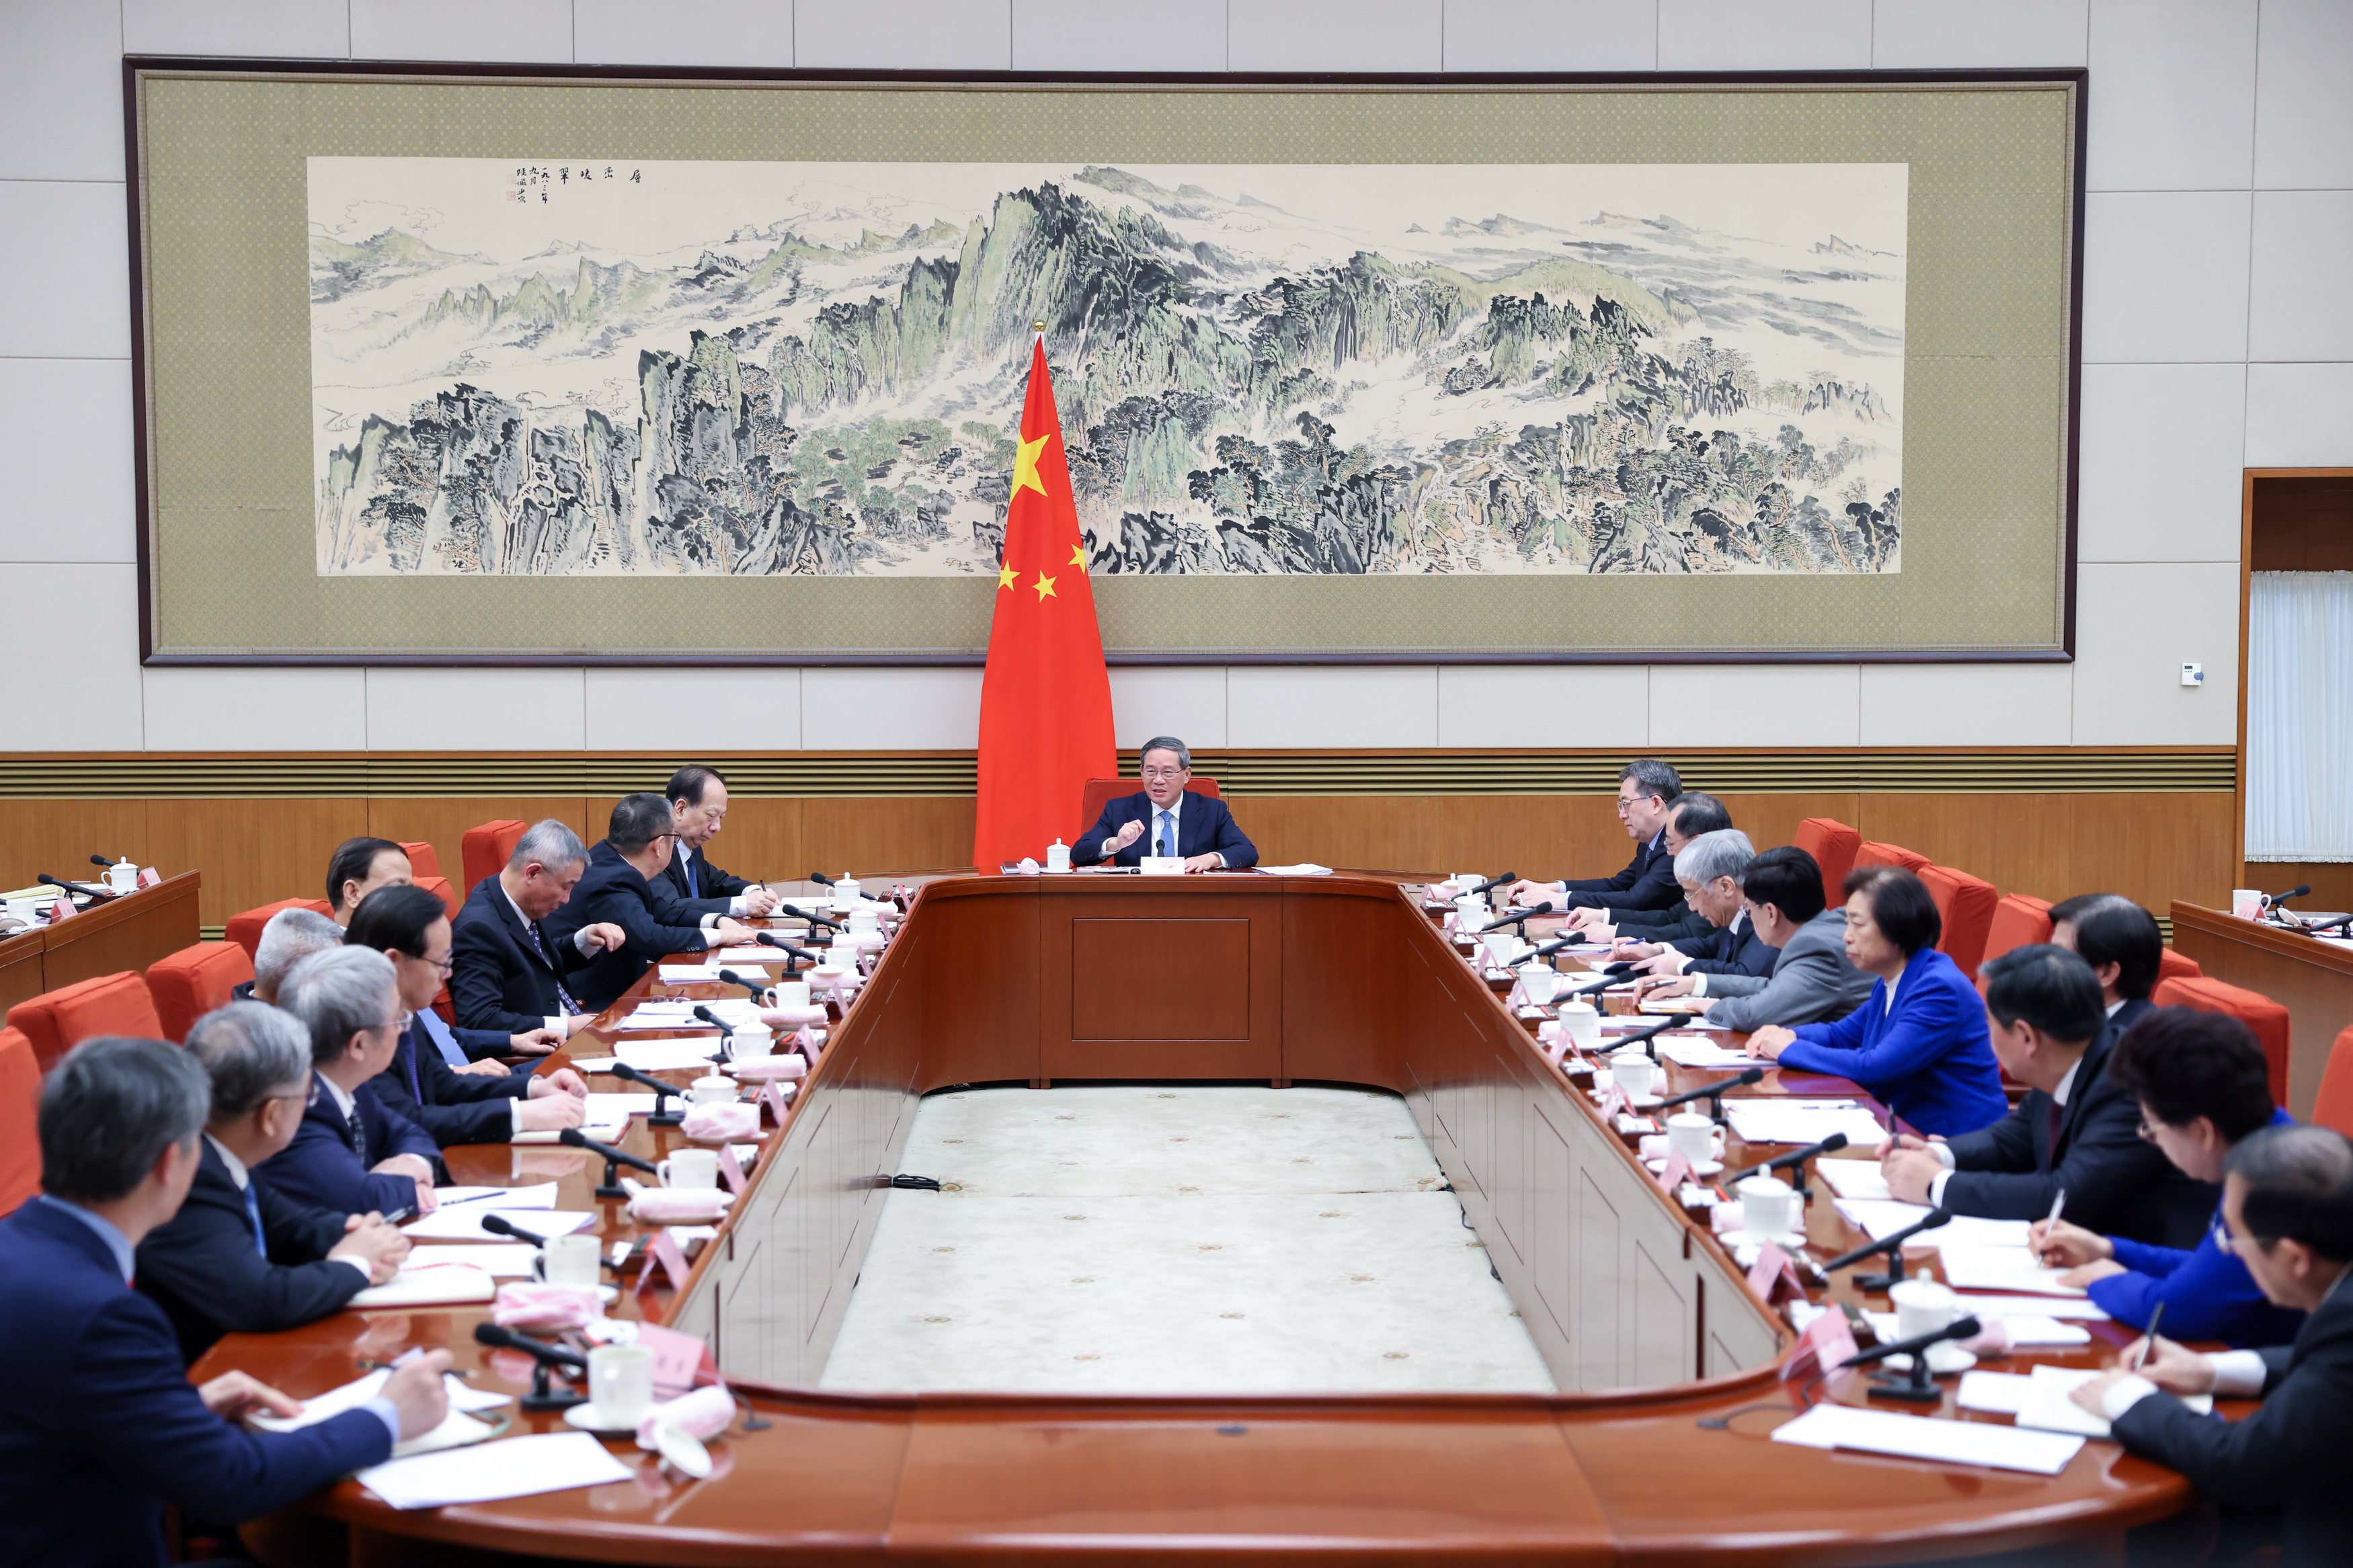 Premier Li Qiang solicited opinions on the drafting of the annual work report from minor political parties and the semi-official All-China Federation of Industry and Commerce on Wednesday. Photo: Xinhua